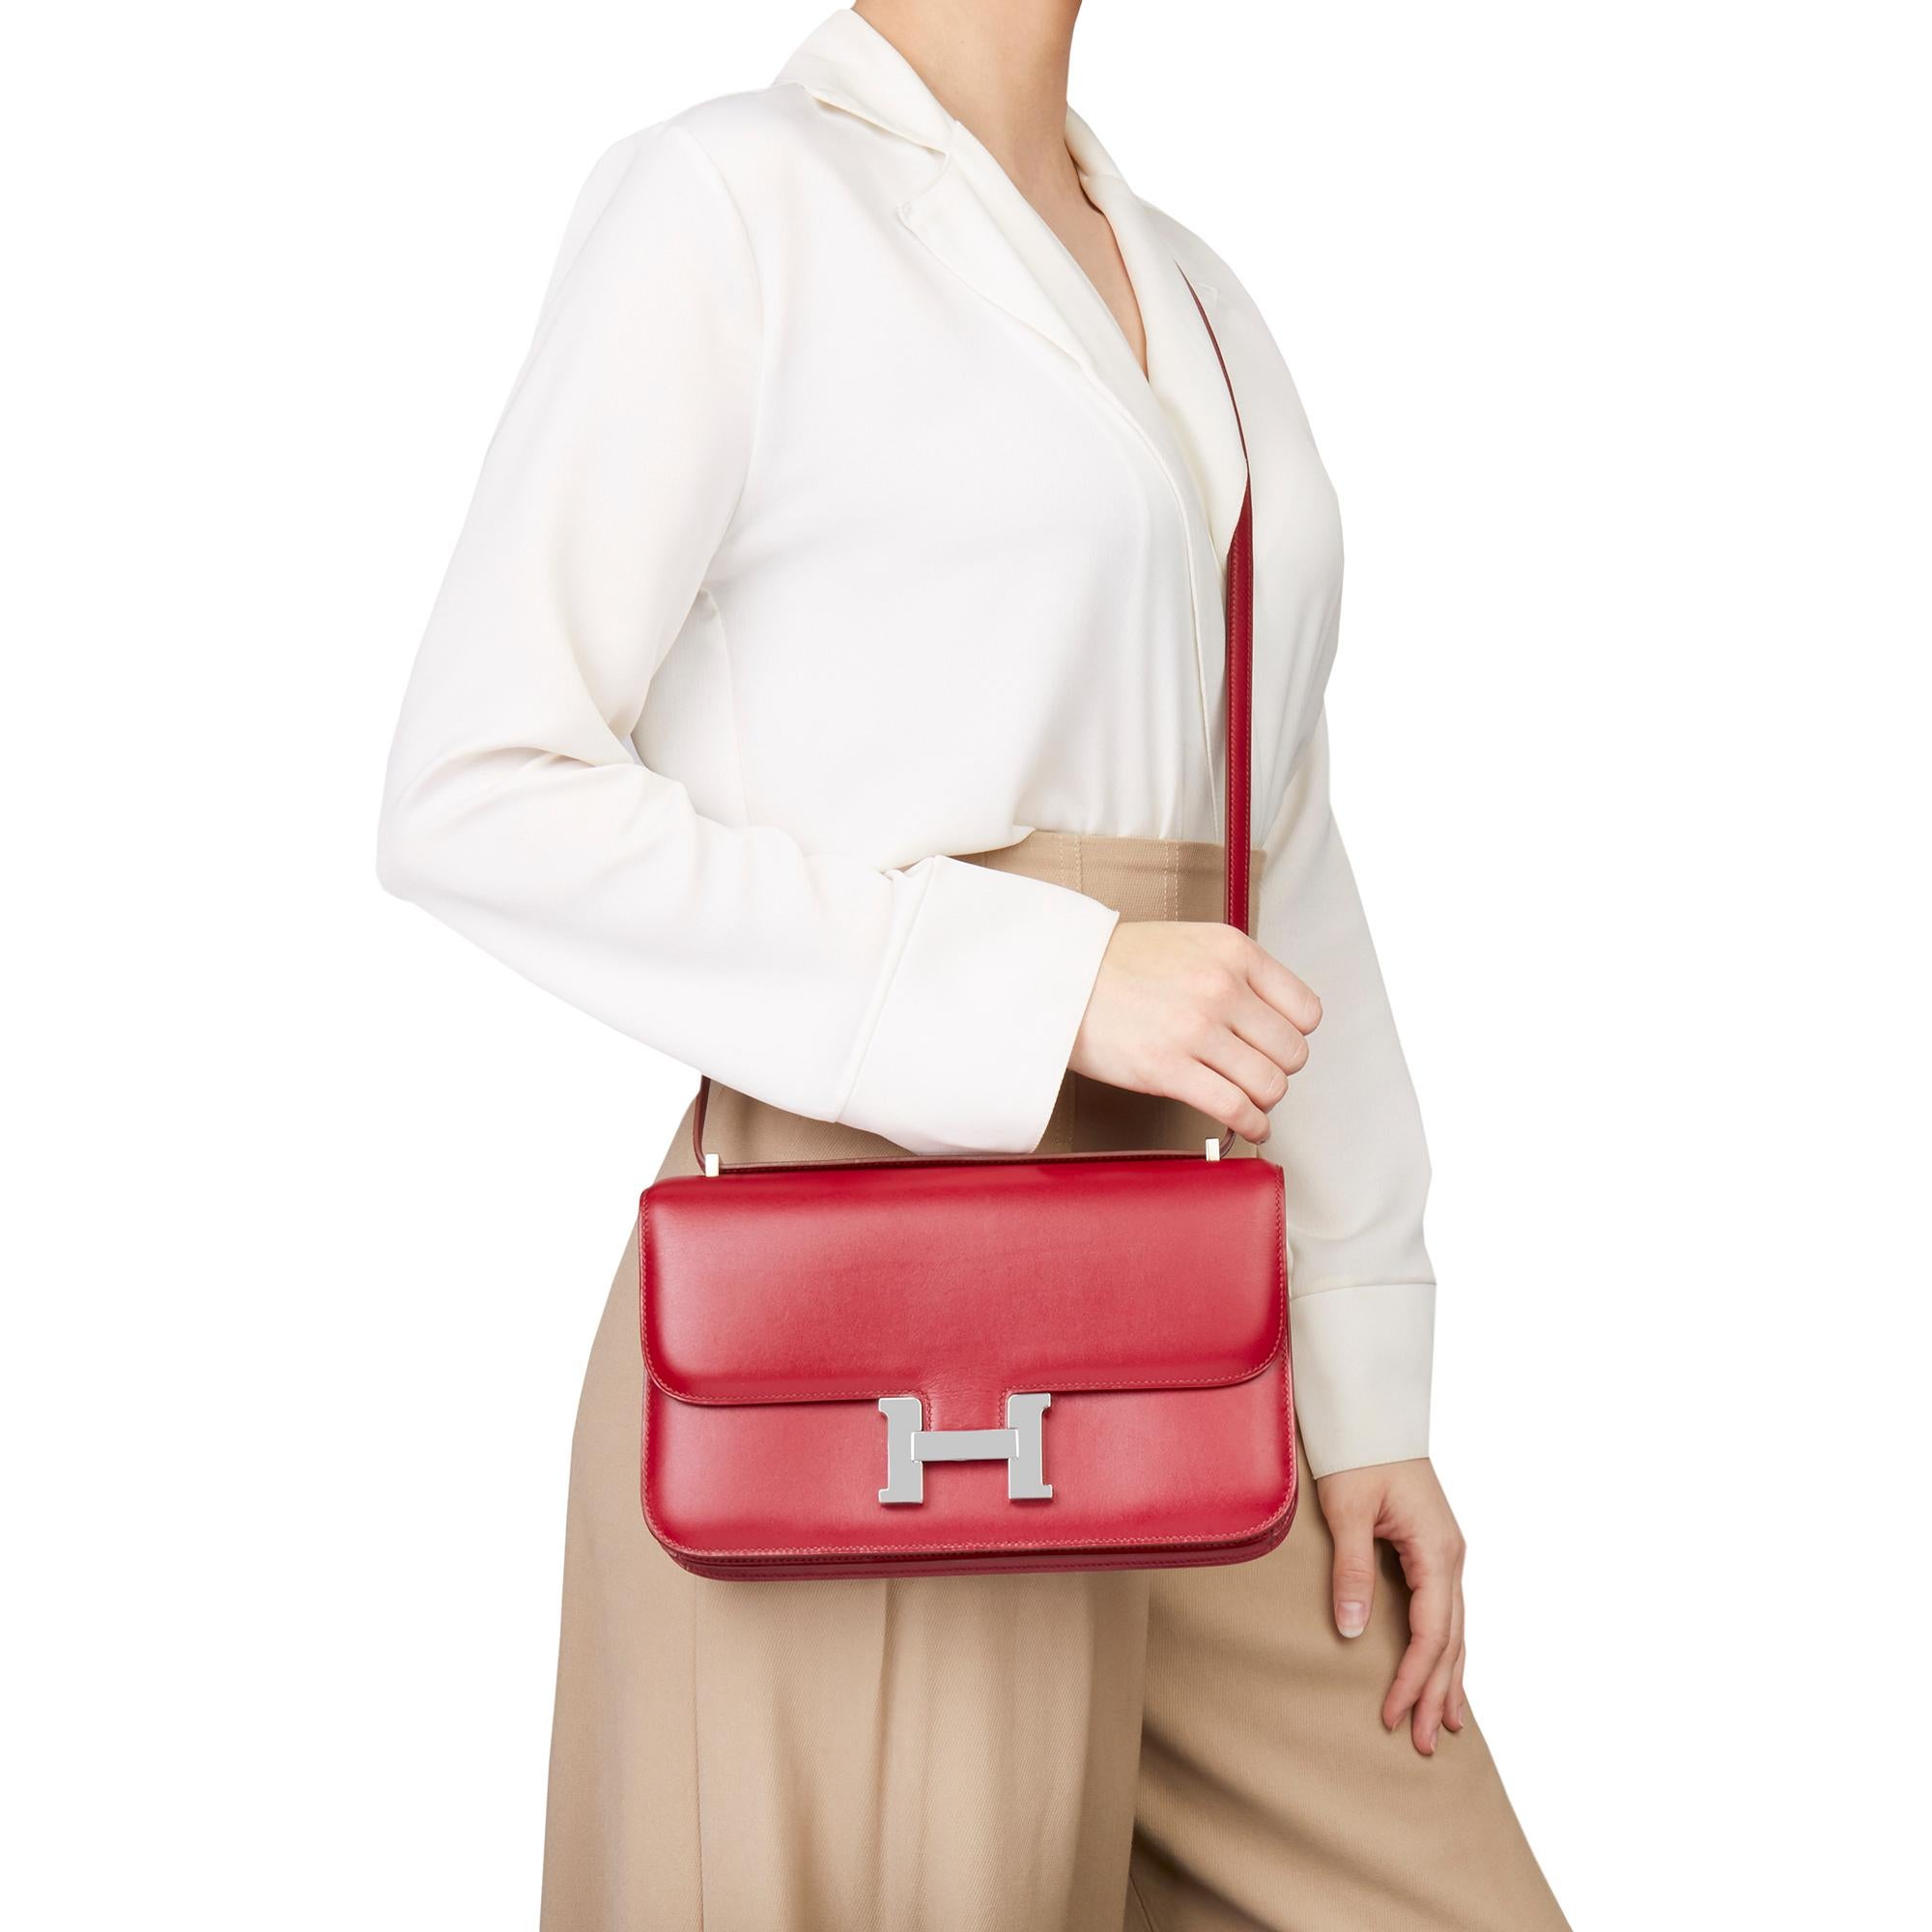 HERMÈS
Rubis Tadelakt Leather Constance Elan

Xupes Reference: HB2509
Serial Number: [N]
Age (Circa): 2010
Accompanied By: Hermès Dust Bag, Box
Authenticity Details: Date Stamp (Made in France)
Gender: Ladies
Type: Shoulder, Crossbody

Colour: